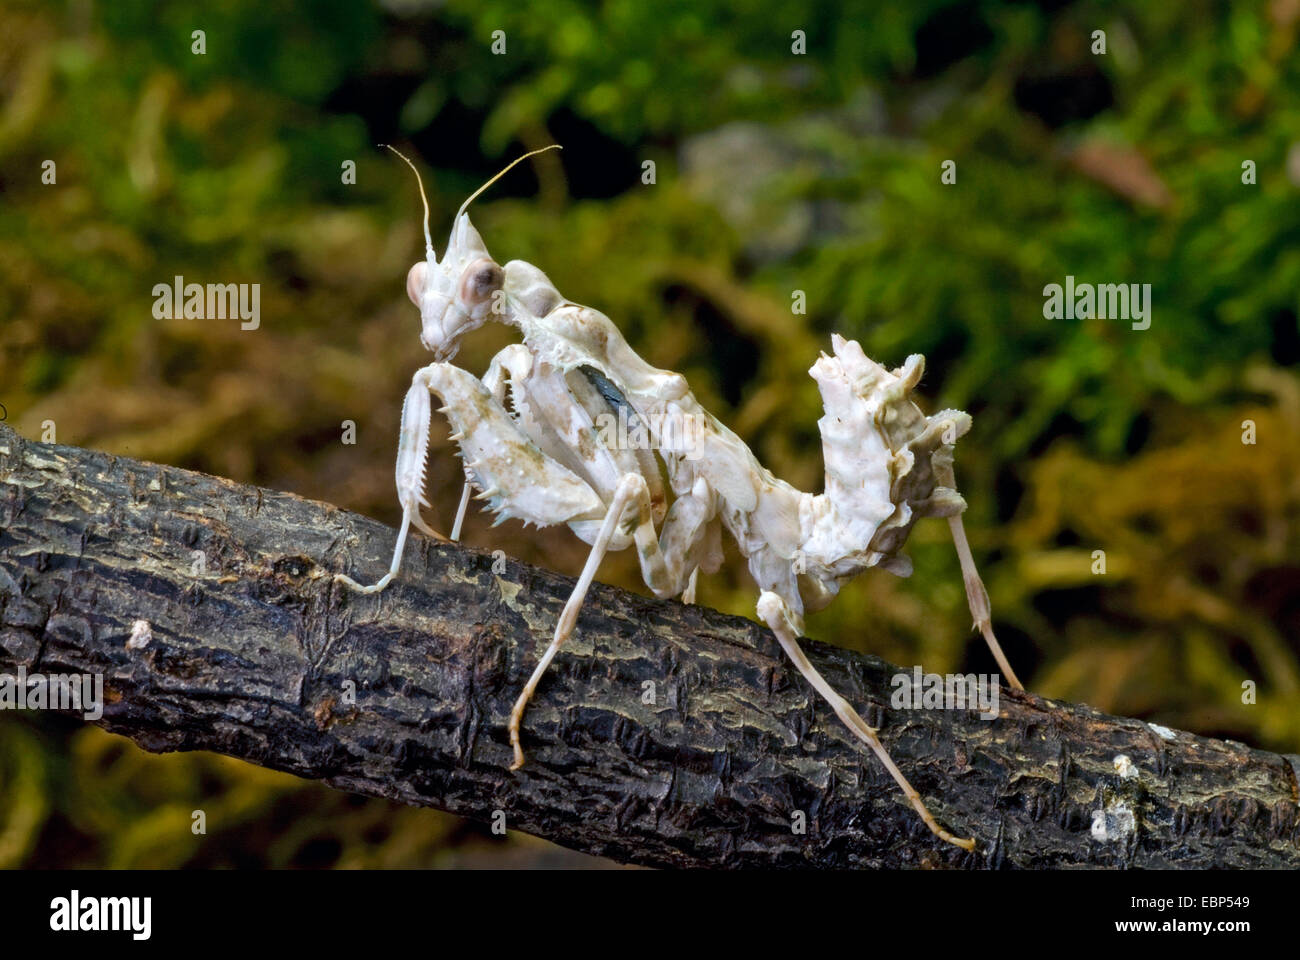 South American Dead Leaf Mantis (Acanthops falcata), on a twig Stock Photo